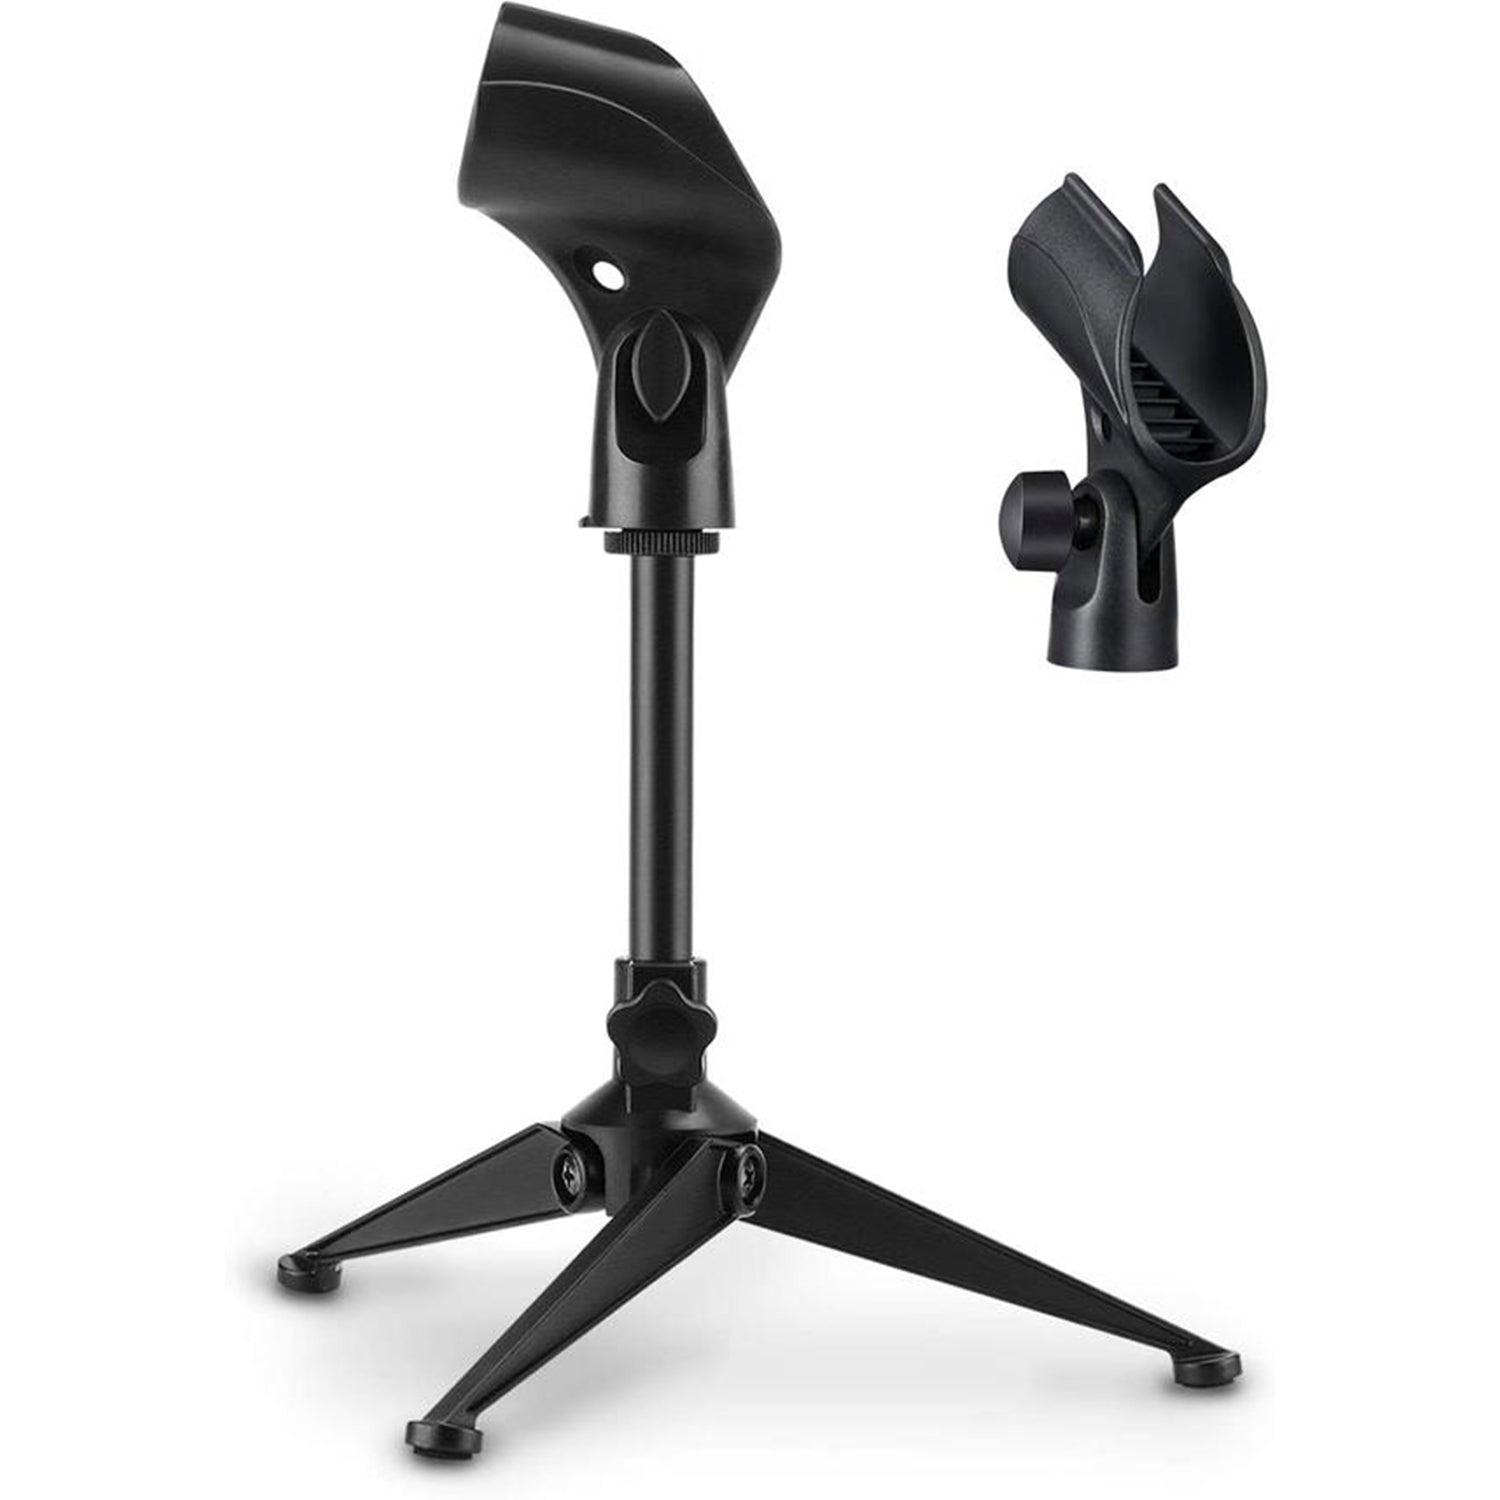 

Moukey Desk Tripod Mic Stand Universal Adjustable Foldable with Microphone Clip